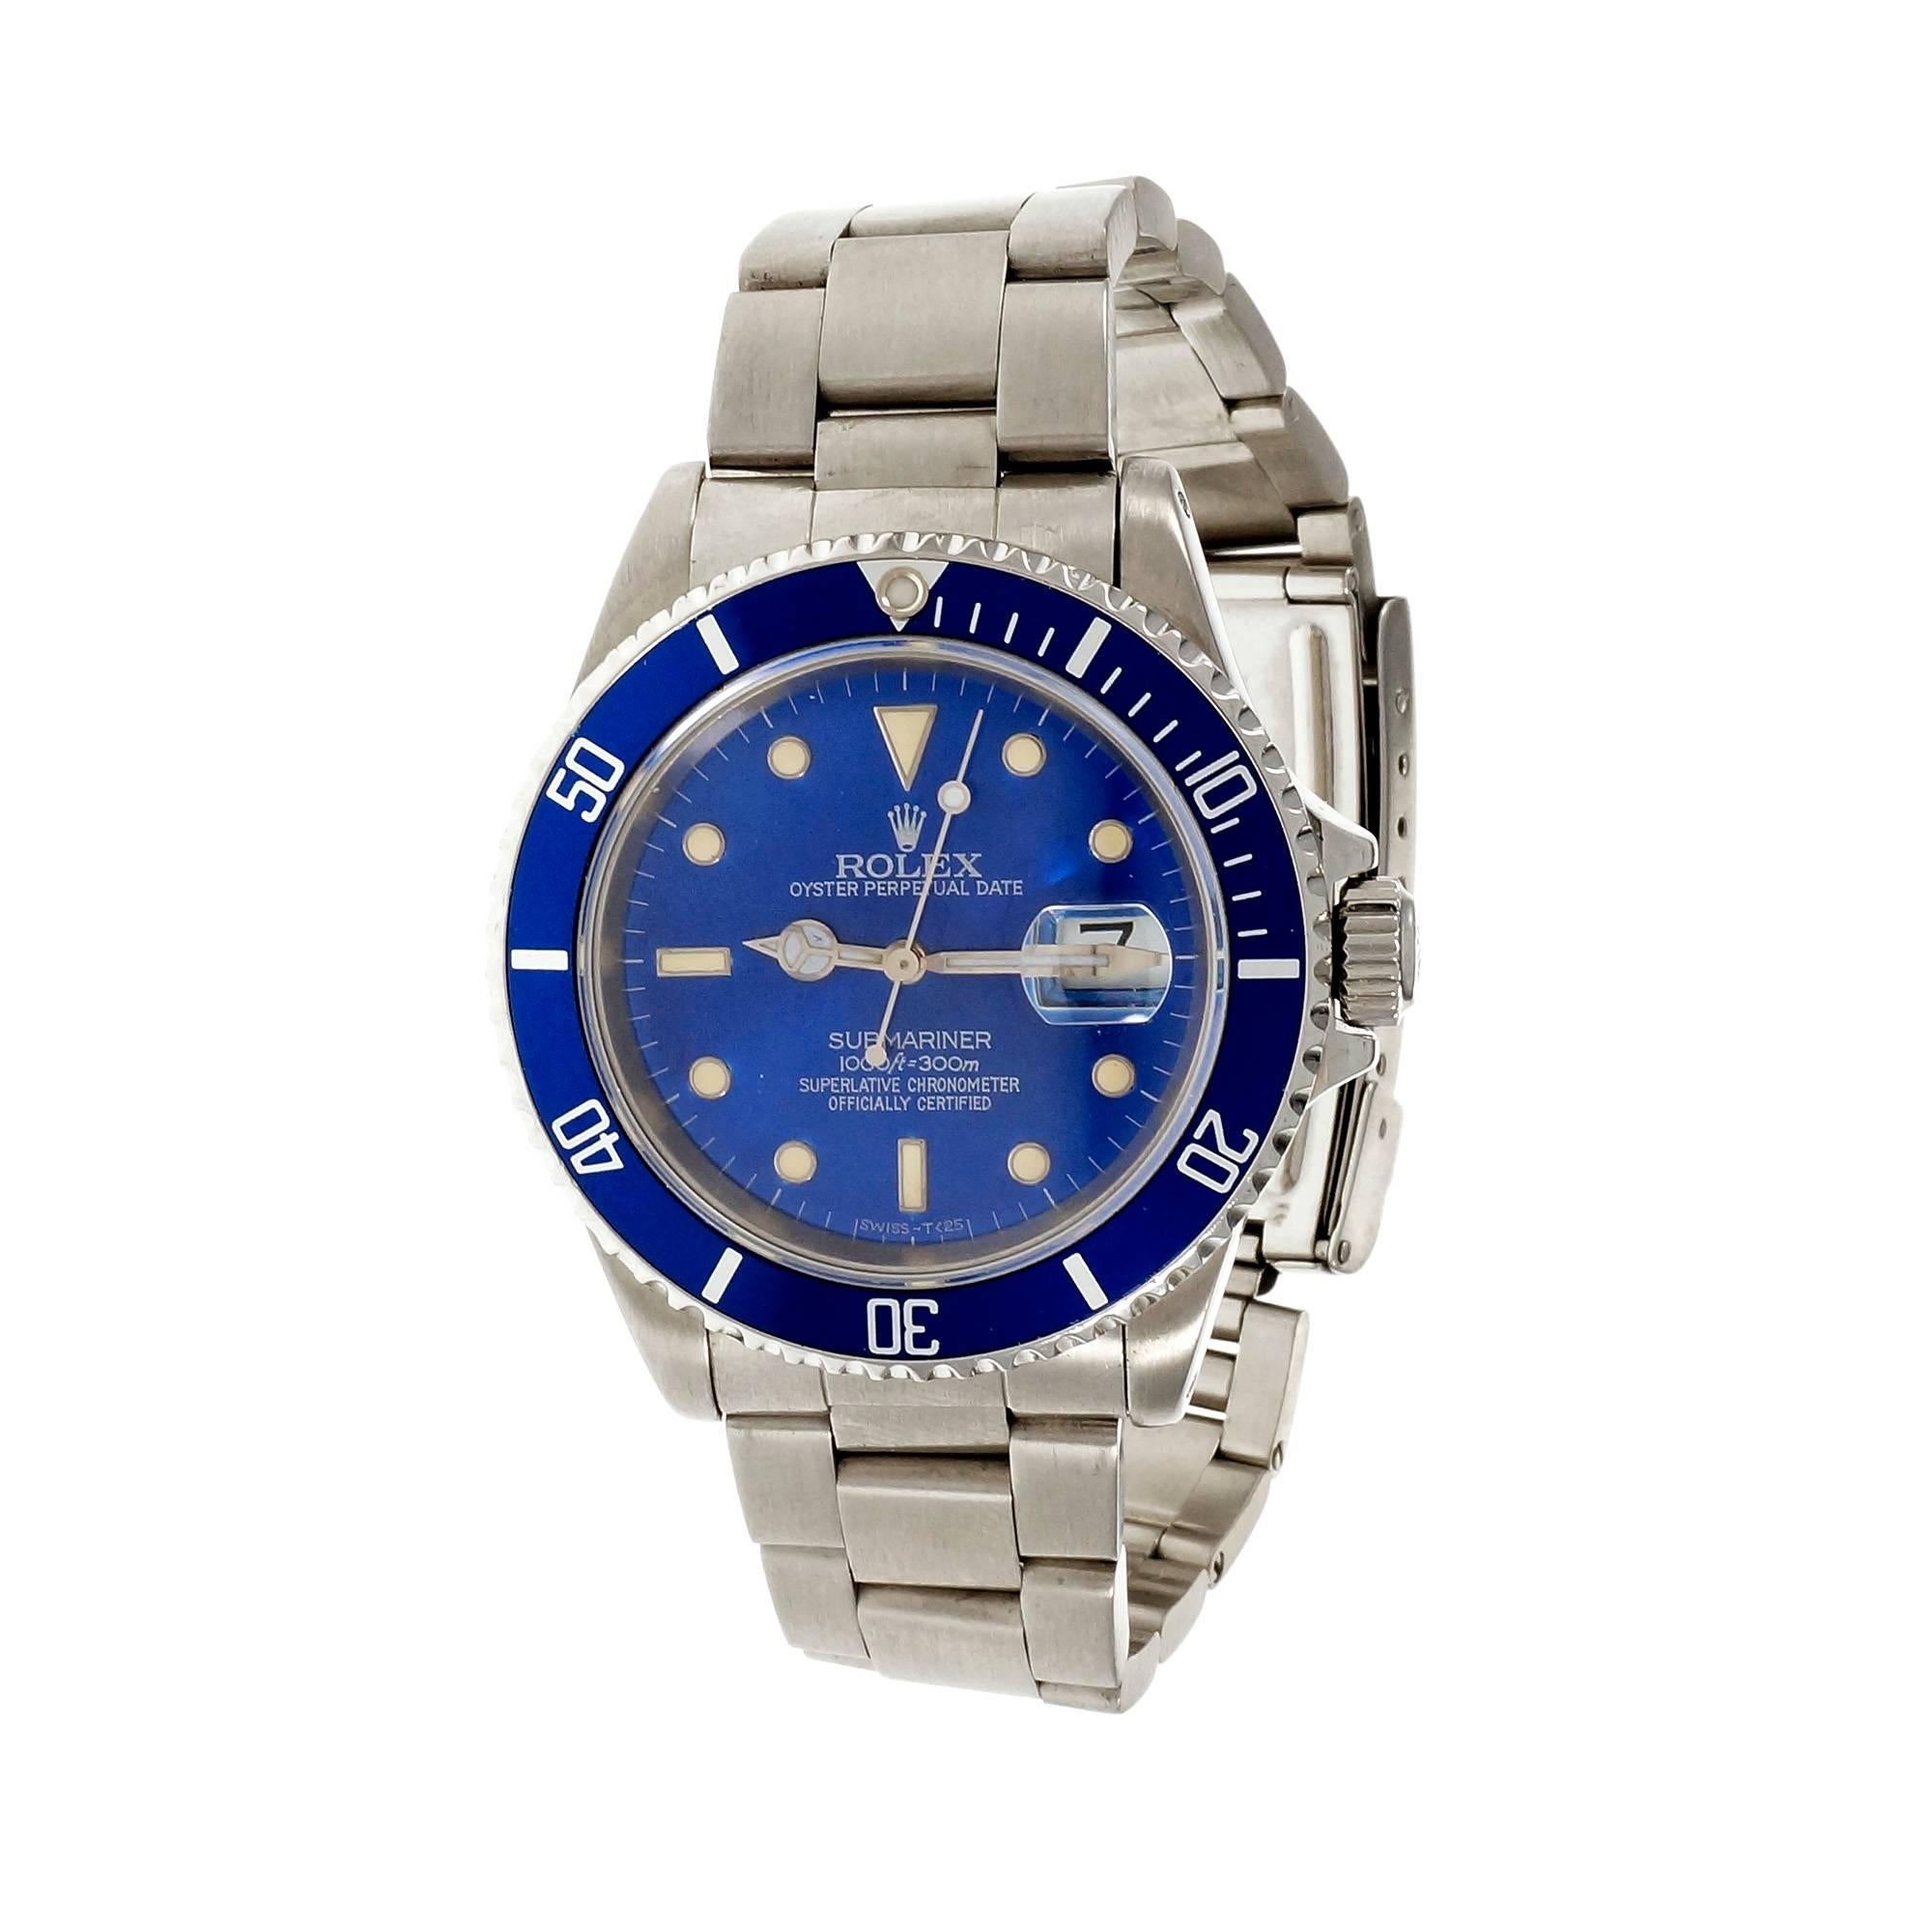 Steel Rolex Submariner 16610 with customized bright blue dial and bezel rim. Matt finish Rolex Oyster band.  © 1992.

Steel
131.0 grams
Band length: 8.5 inches
Length: 47mm
Width: 38mm
Band width at case: 20mm
Case thickness: 12.9mm
Band: Rolex